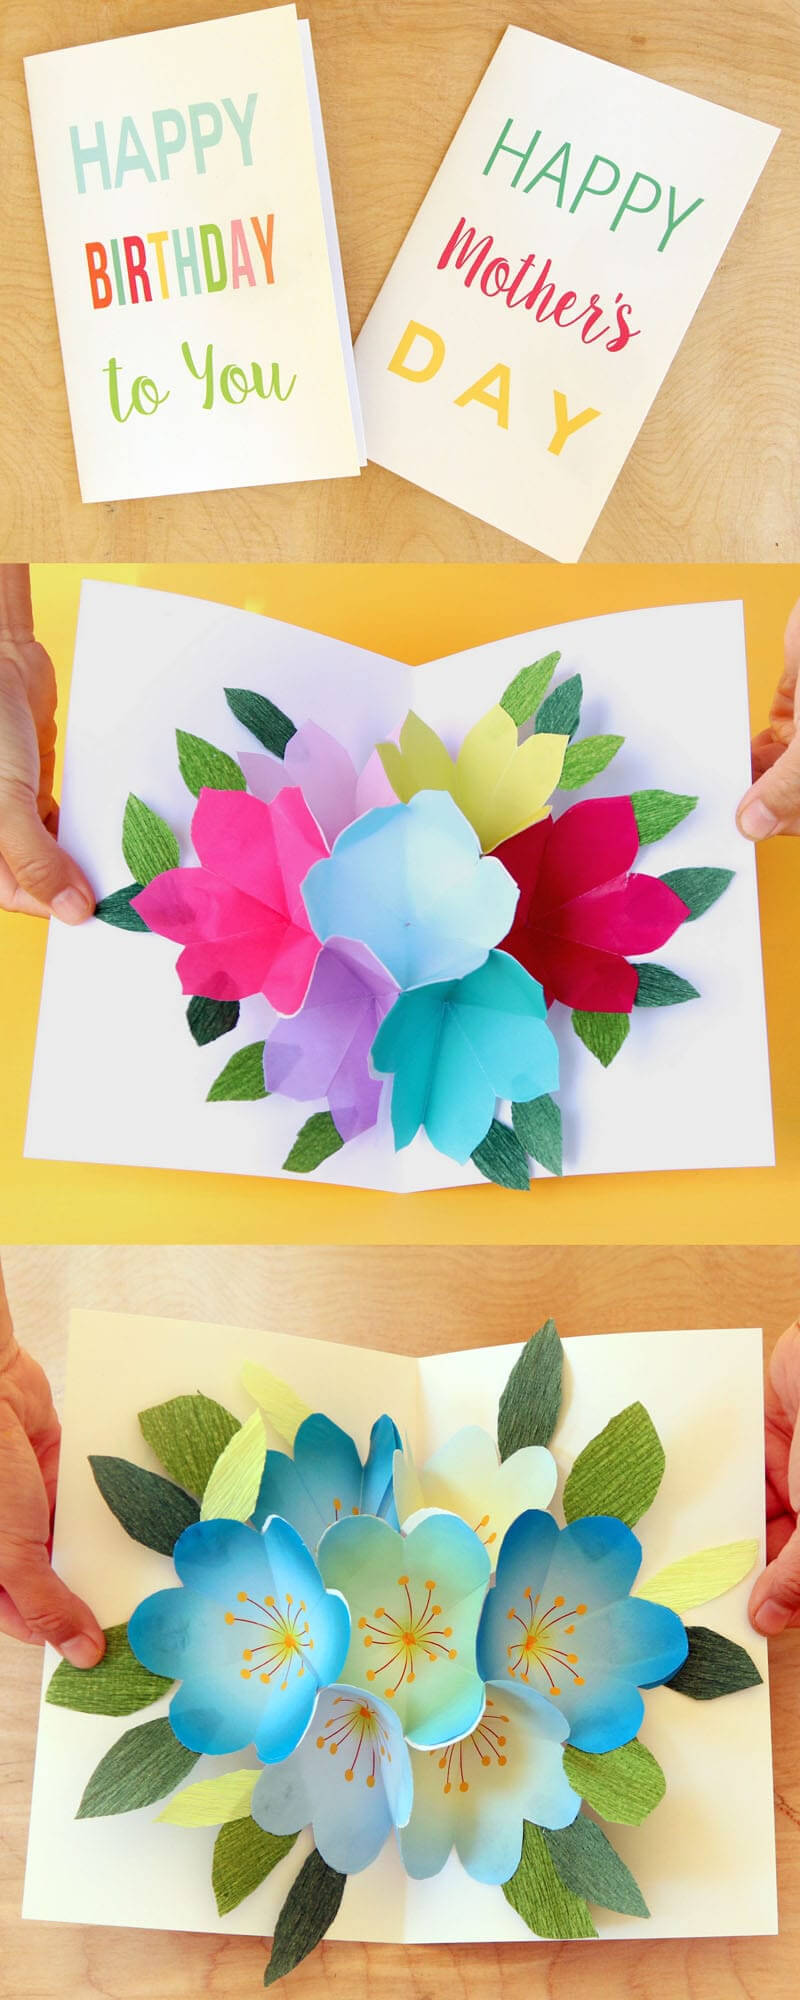 Free Printable Happy Birthday Card With Pop Up Bouquet – A Within Free Printable Pop Up Card Templates